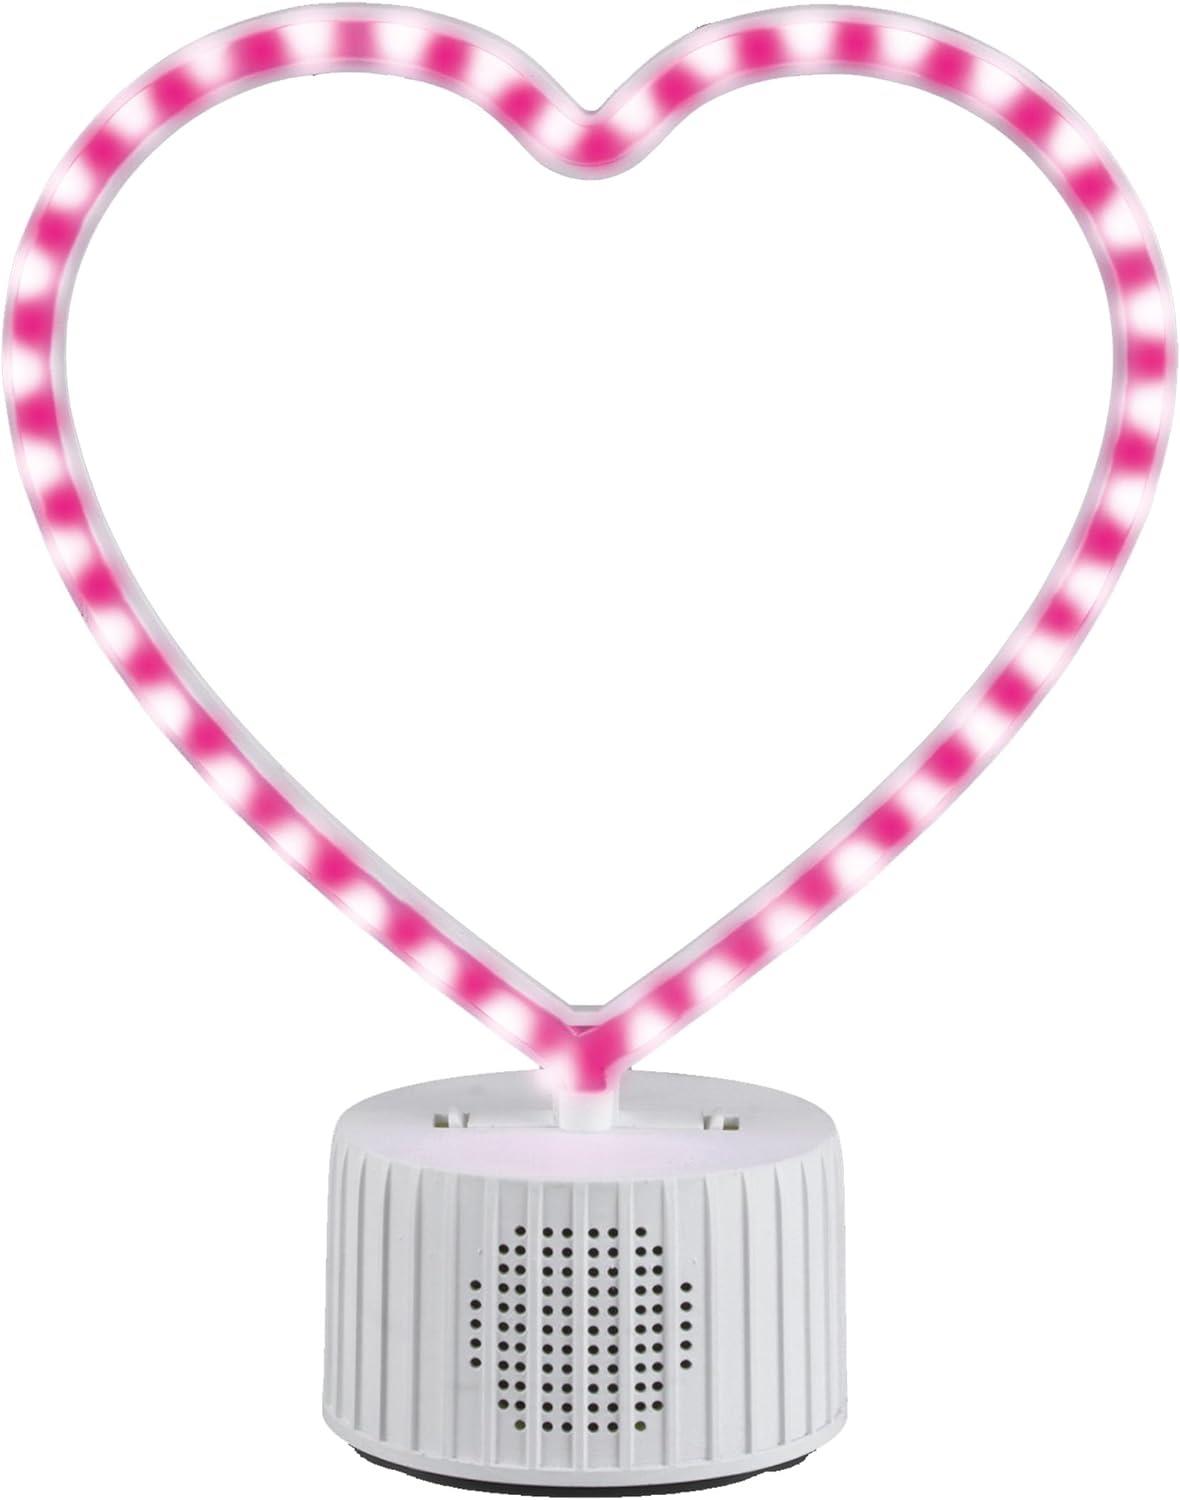 Intempo Bluetooth Speaker LED Heart Portable USB Charging Neon Pink with Cable